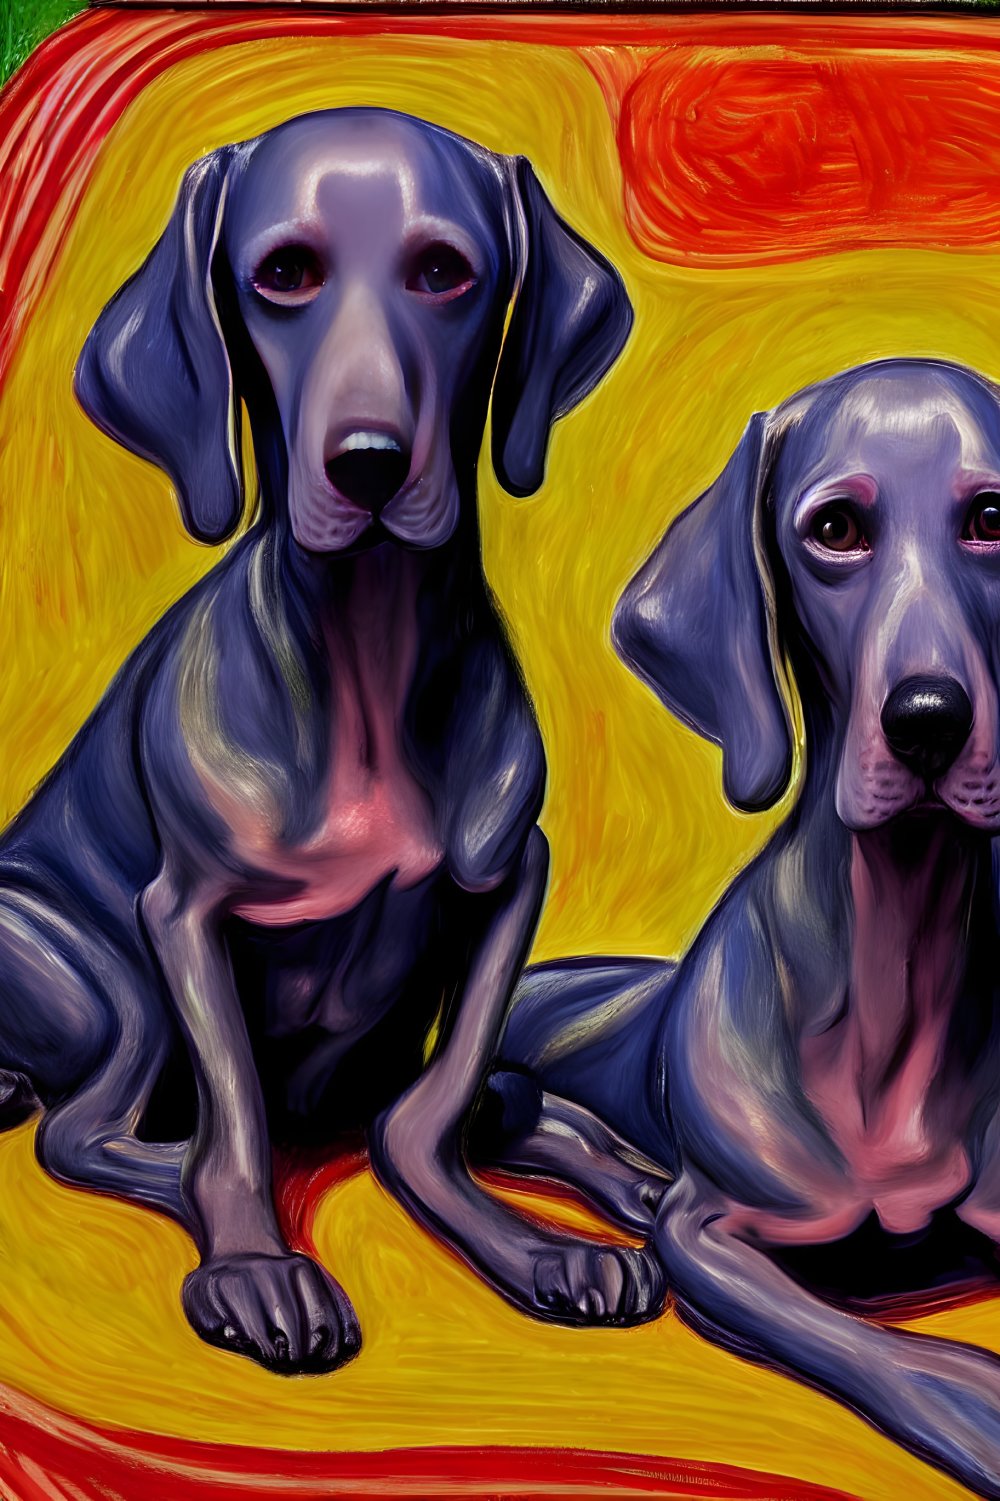 Stylized dogs with exaggerated features on vibrant red and yellow background